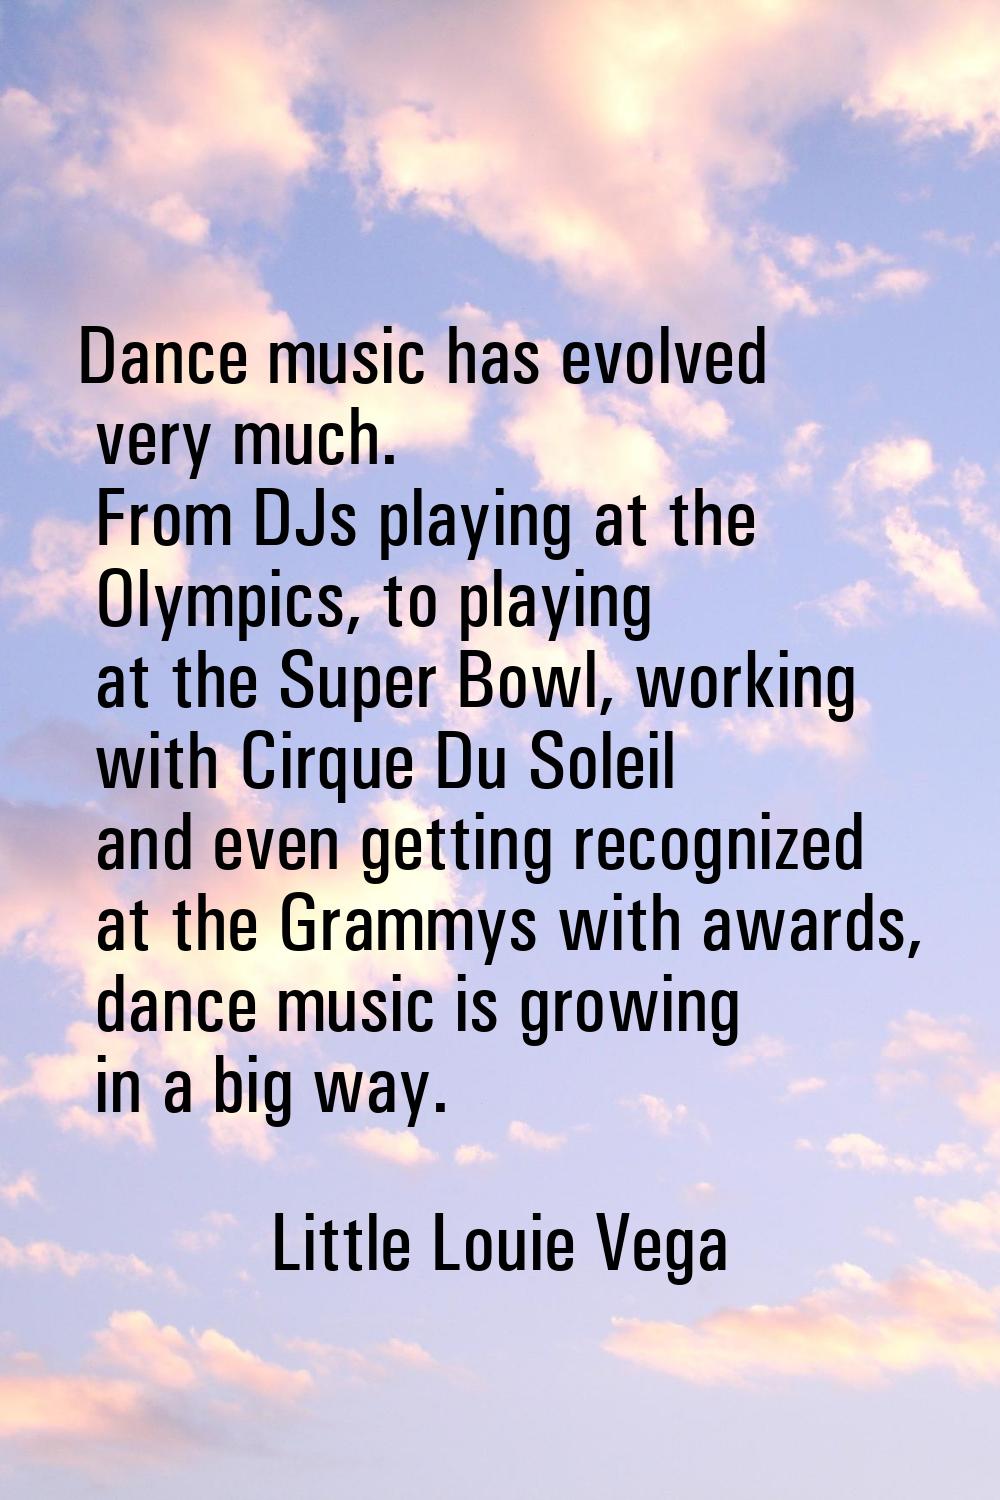 Dance music has evolved very much. From DJs playing at the Olympics, to playing at the Super Bowl, 